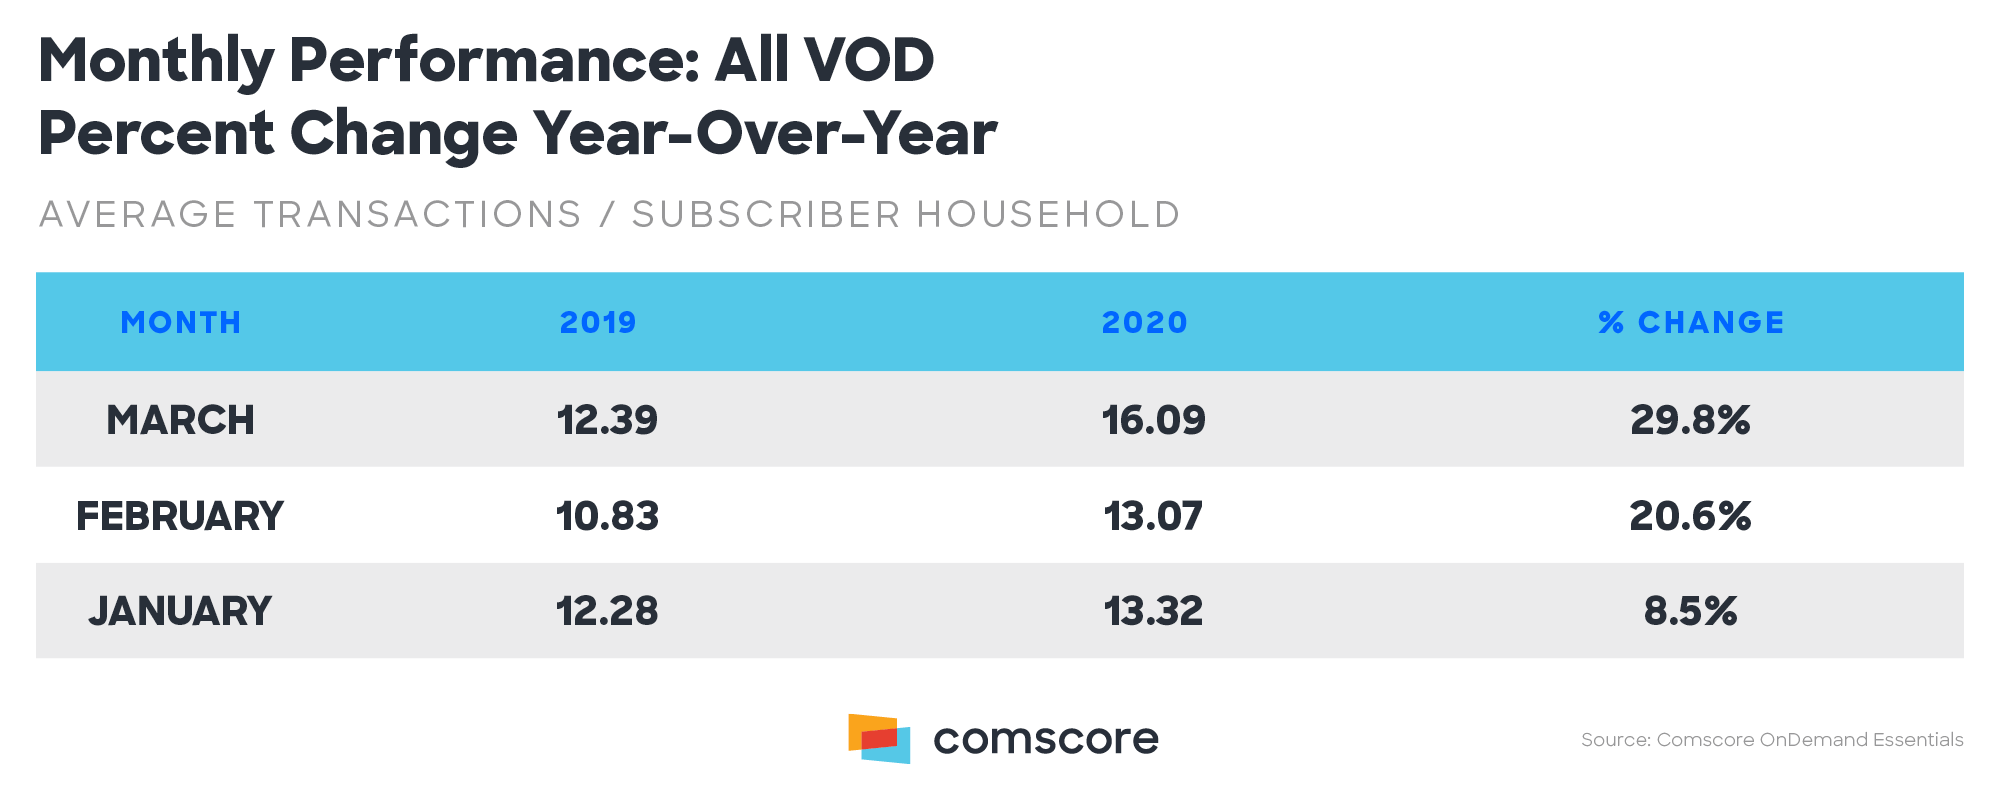 Monthly Performance All VOD Percent Change Year over Year